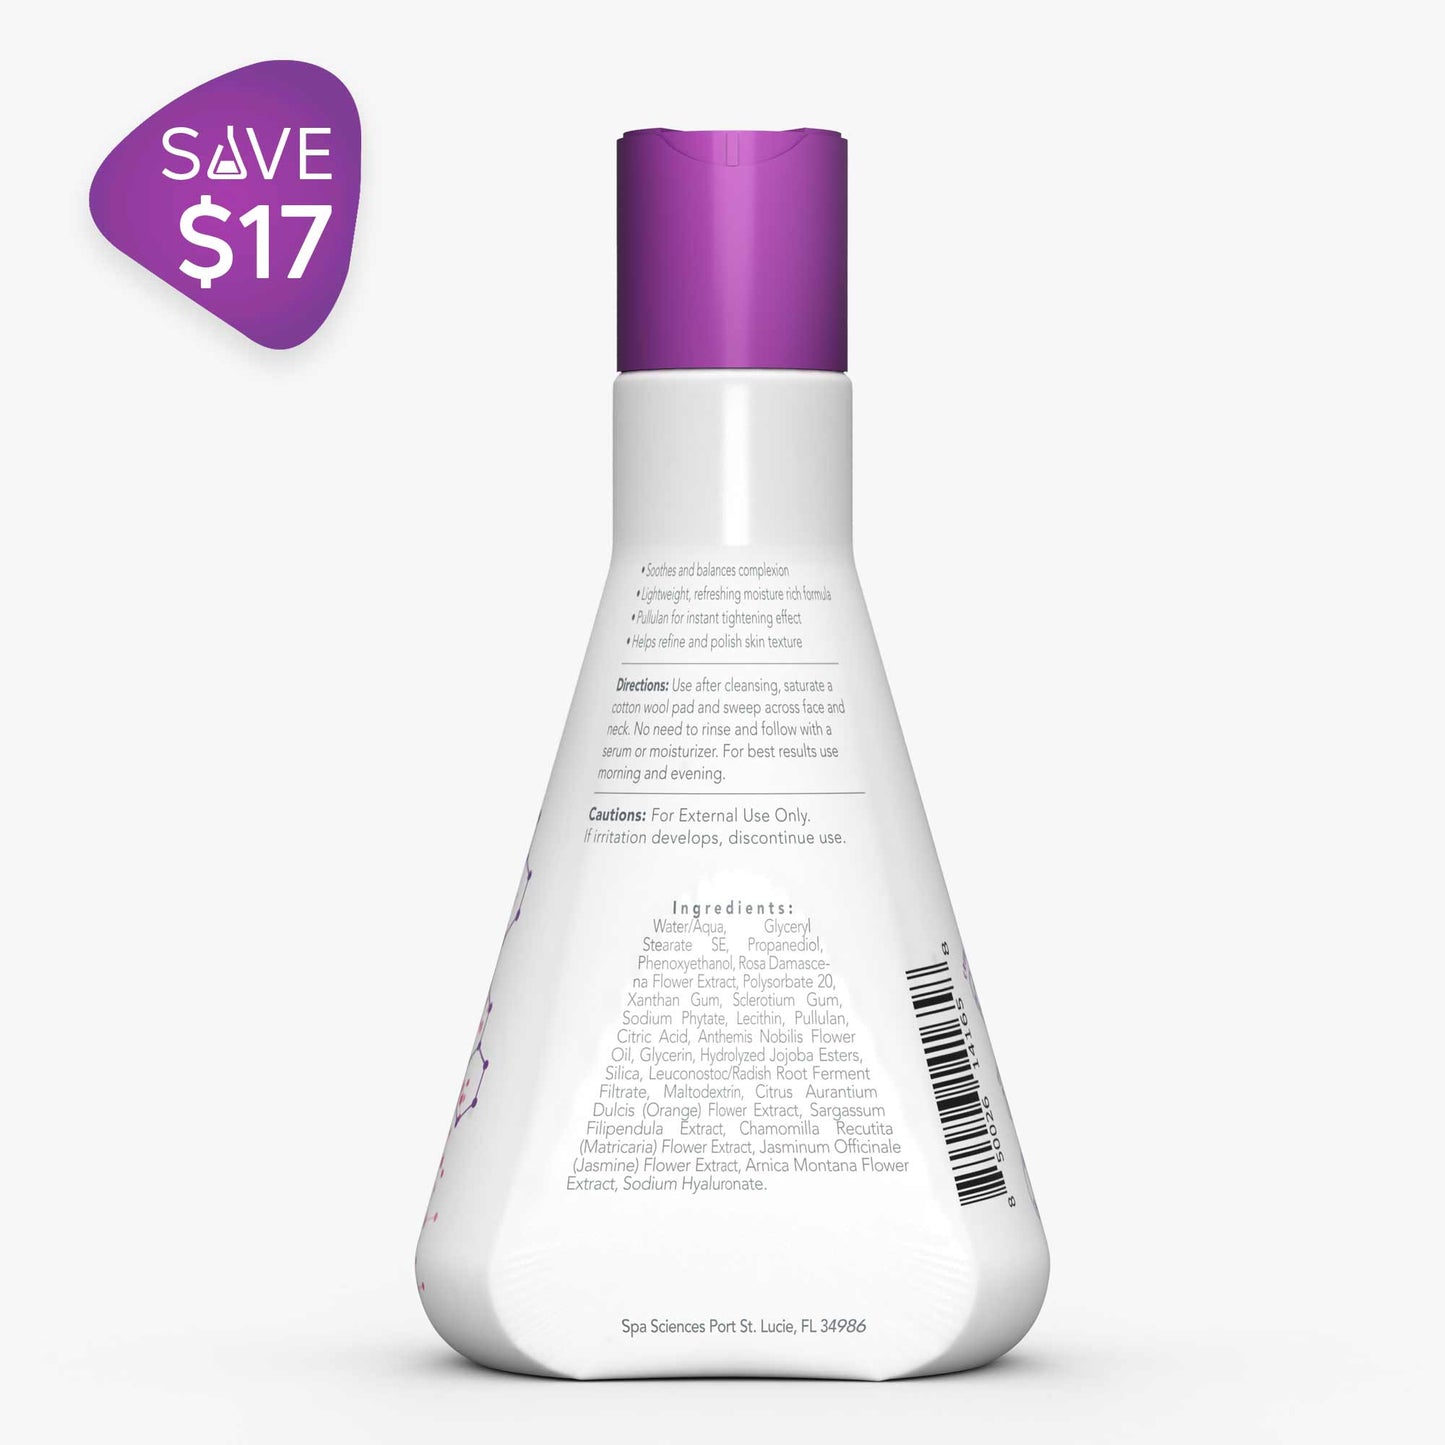 A bottle of Makeup Guru shampoo with a purple label on it from Spa Sciences.